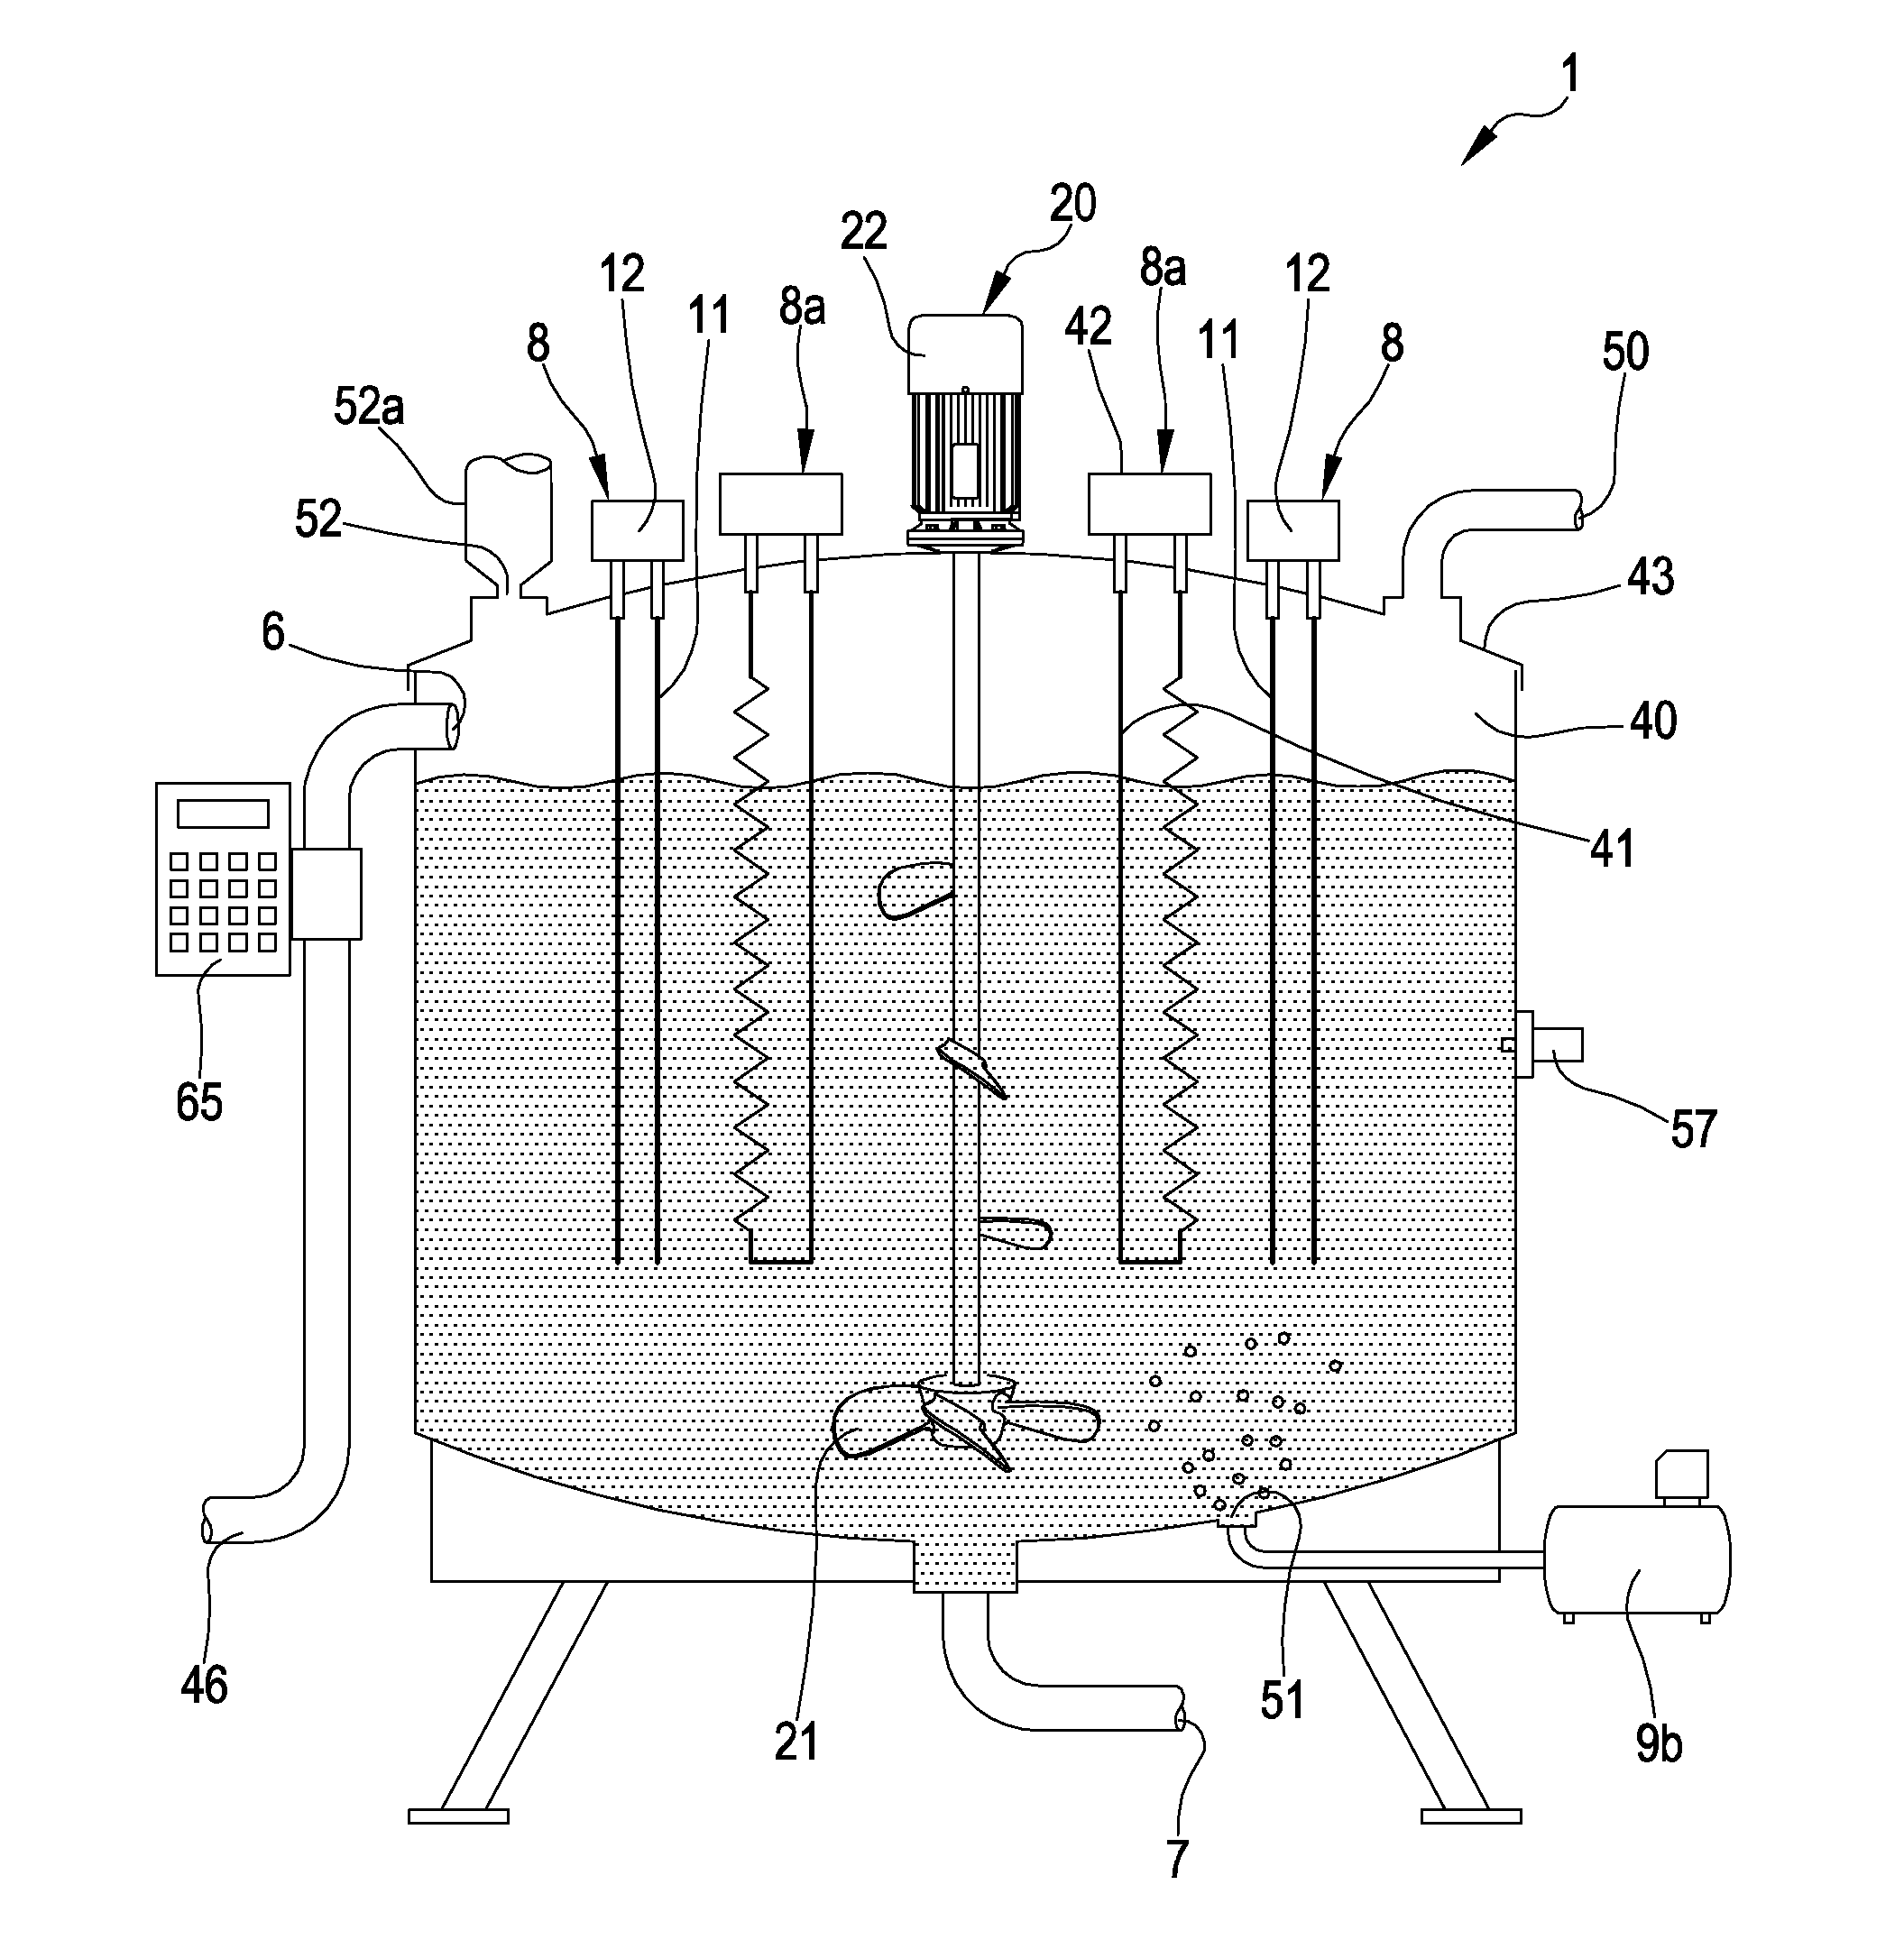 Method and apparatus for treating sewage